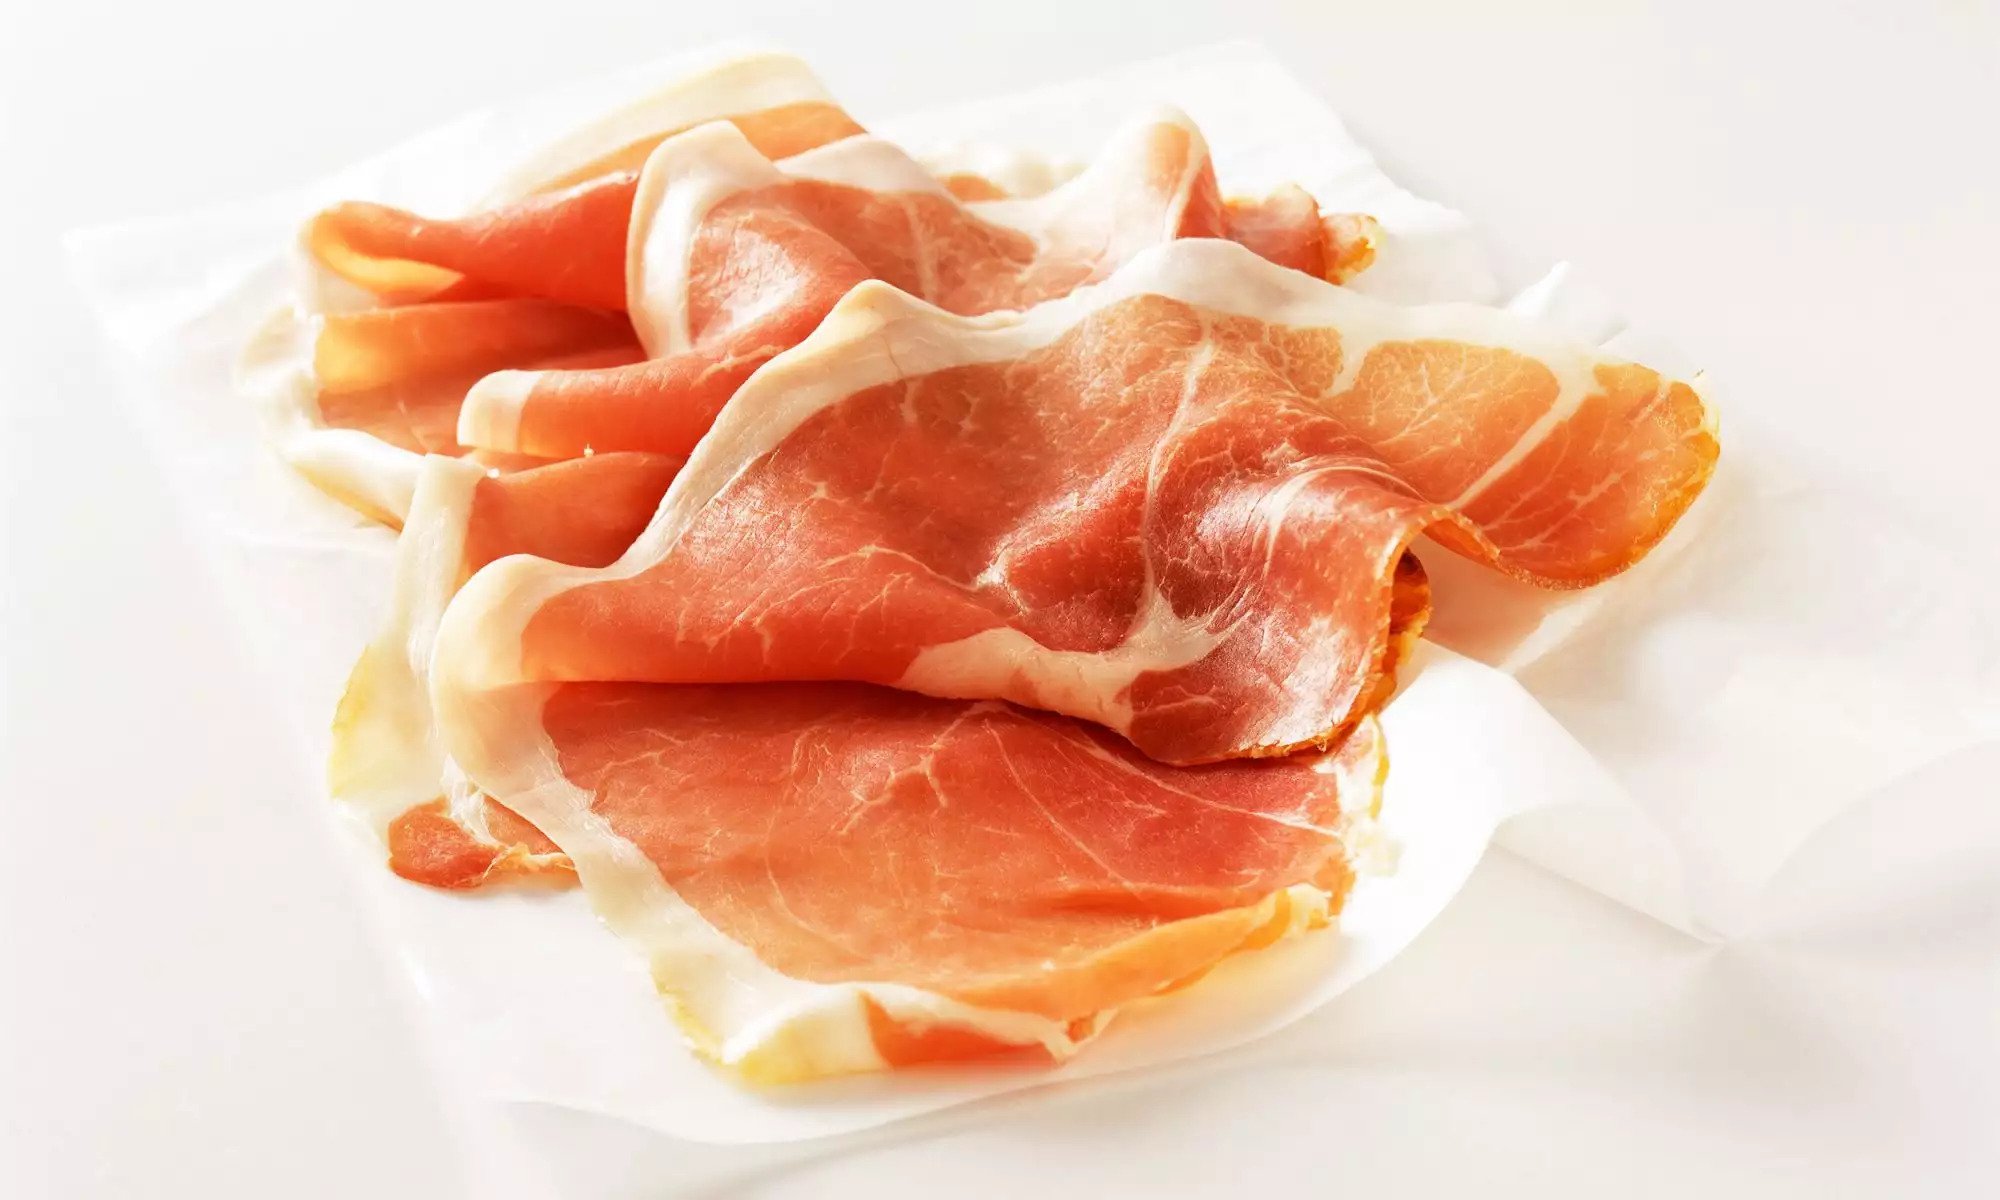 How To Store Prosciutto